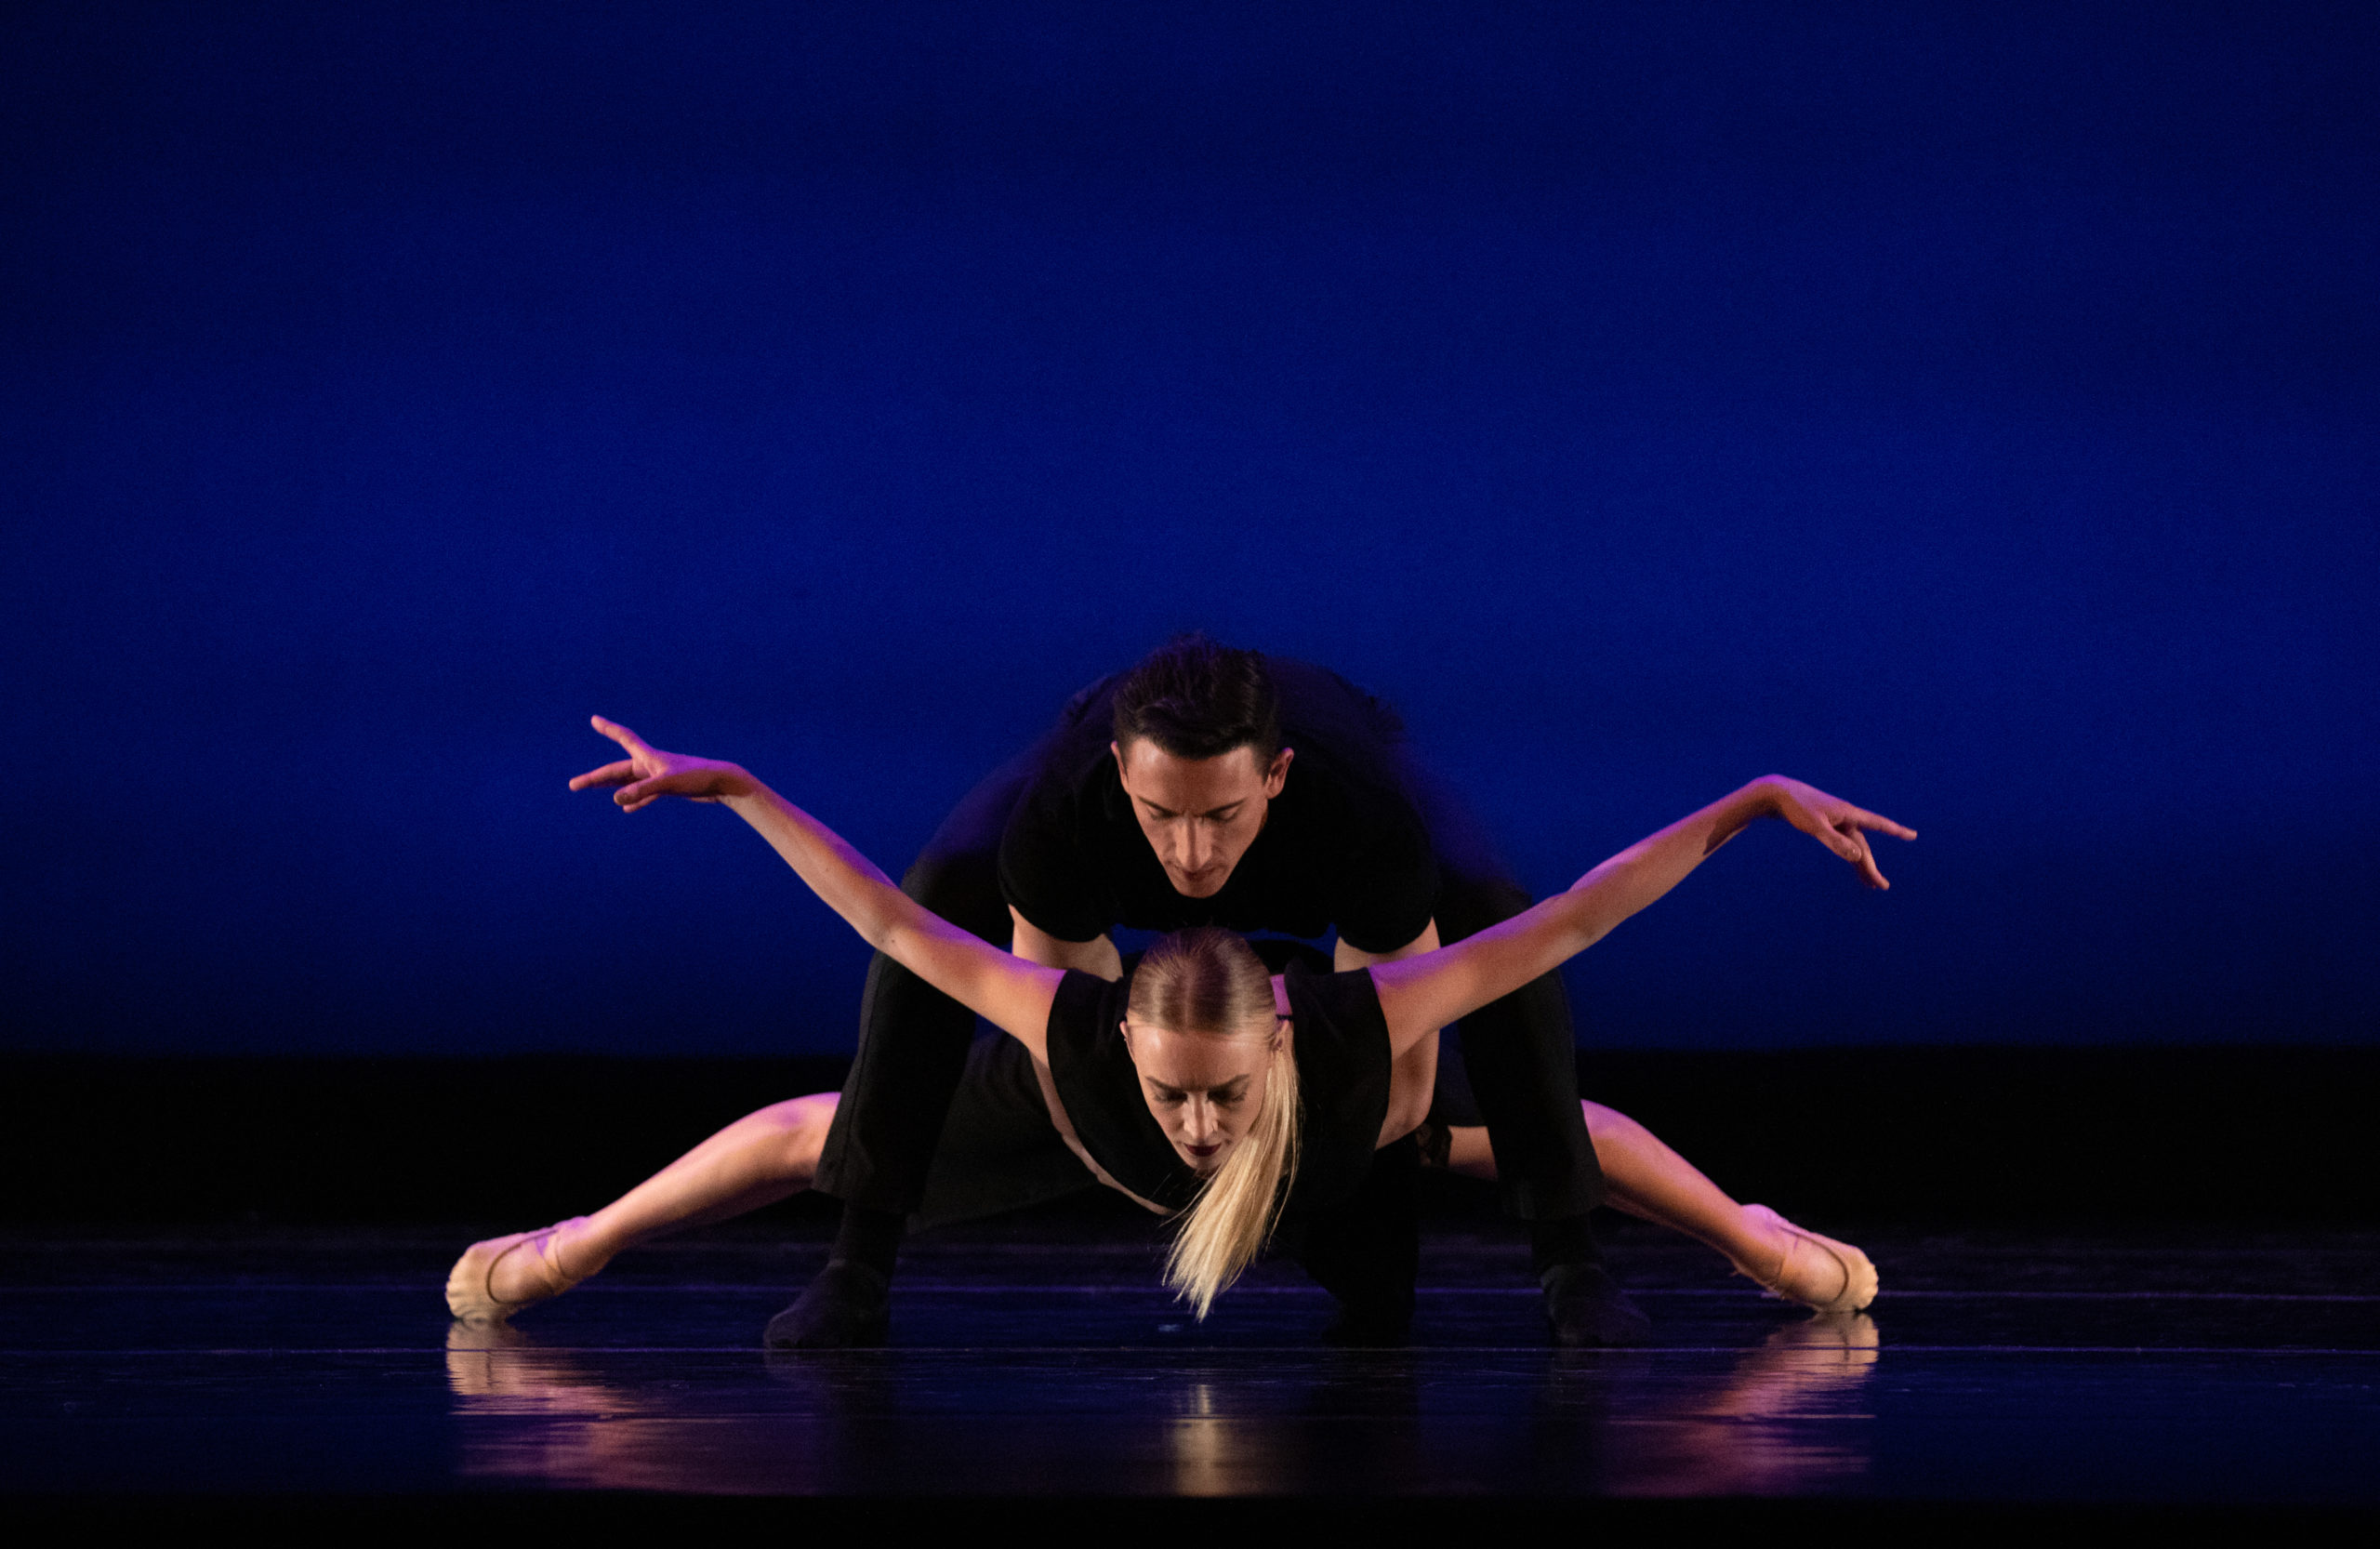 Dance Aspen dancer Anthony Tiedeman crouches forward onstage and holds Kaya Wolsey around the waist. Kaya is close to the floor and spreads her arms and legs out to the side. Anthony wears a black shirt and pants, while Kaya wears a short black dress.